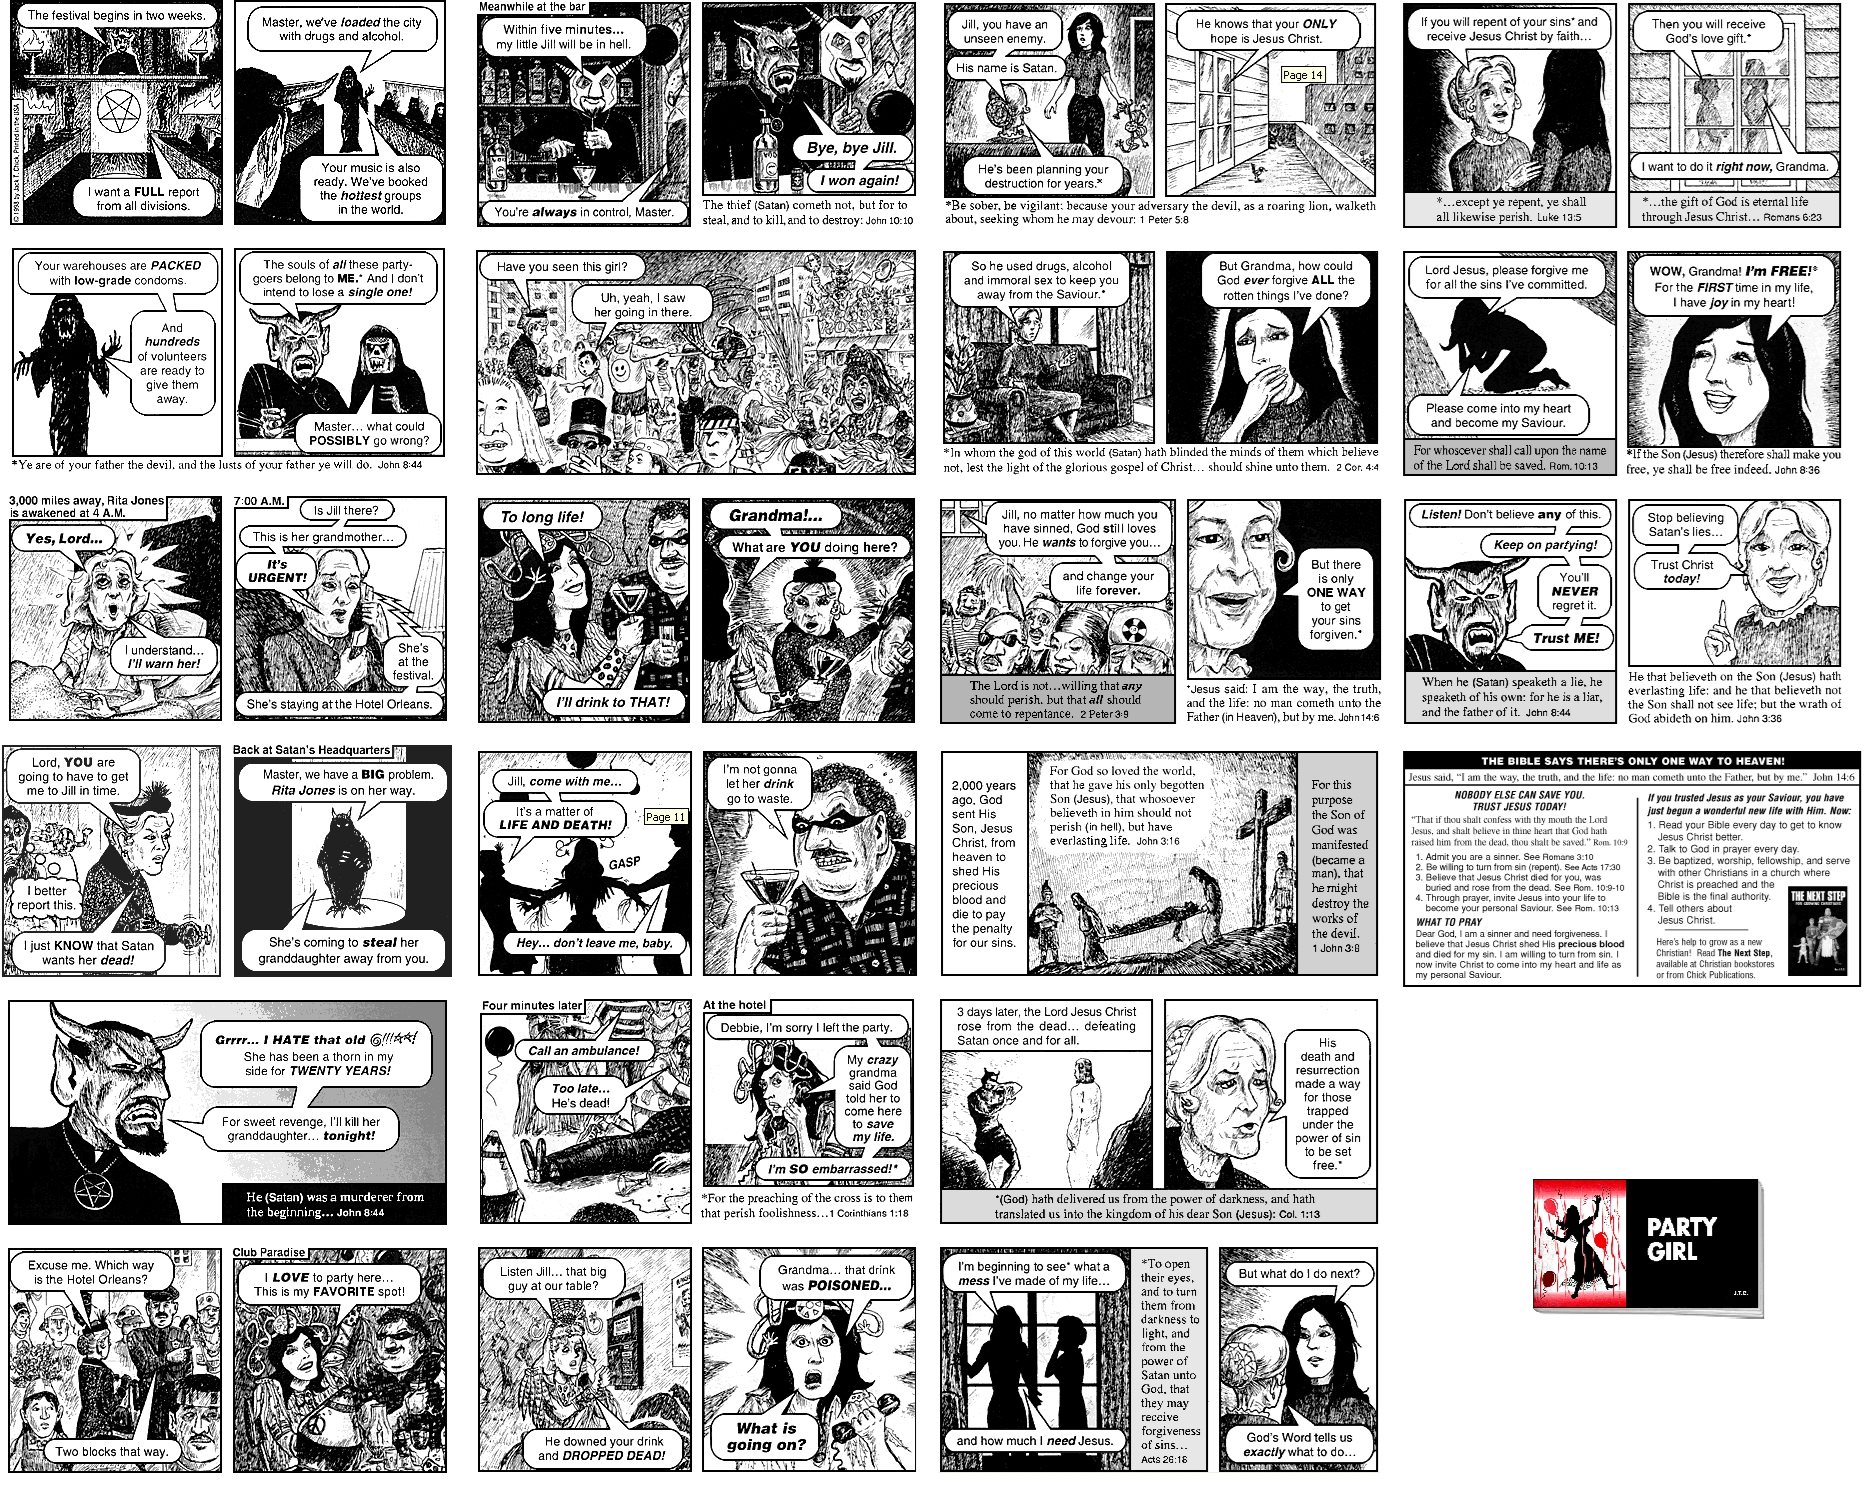 Died Jack Chick Cartoonist Whose Controversial Tracts Be News 1215